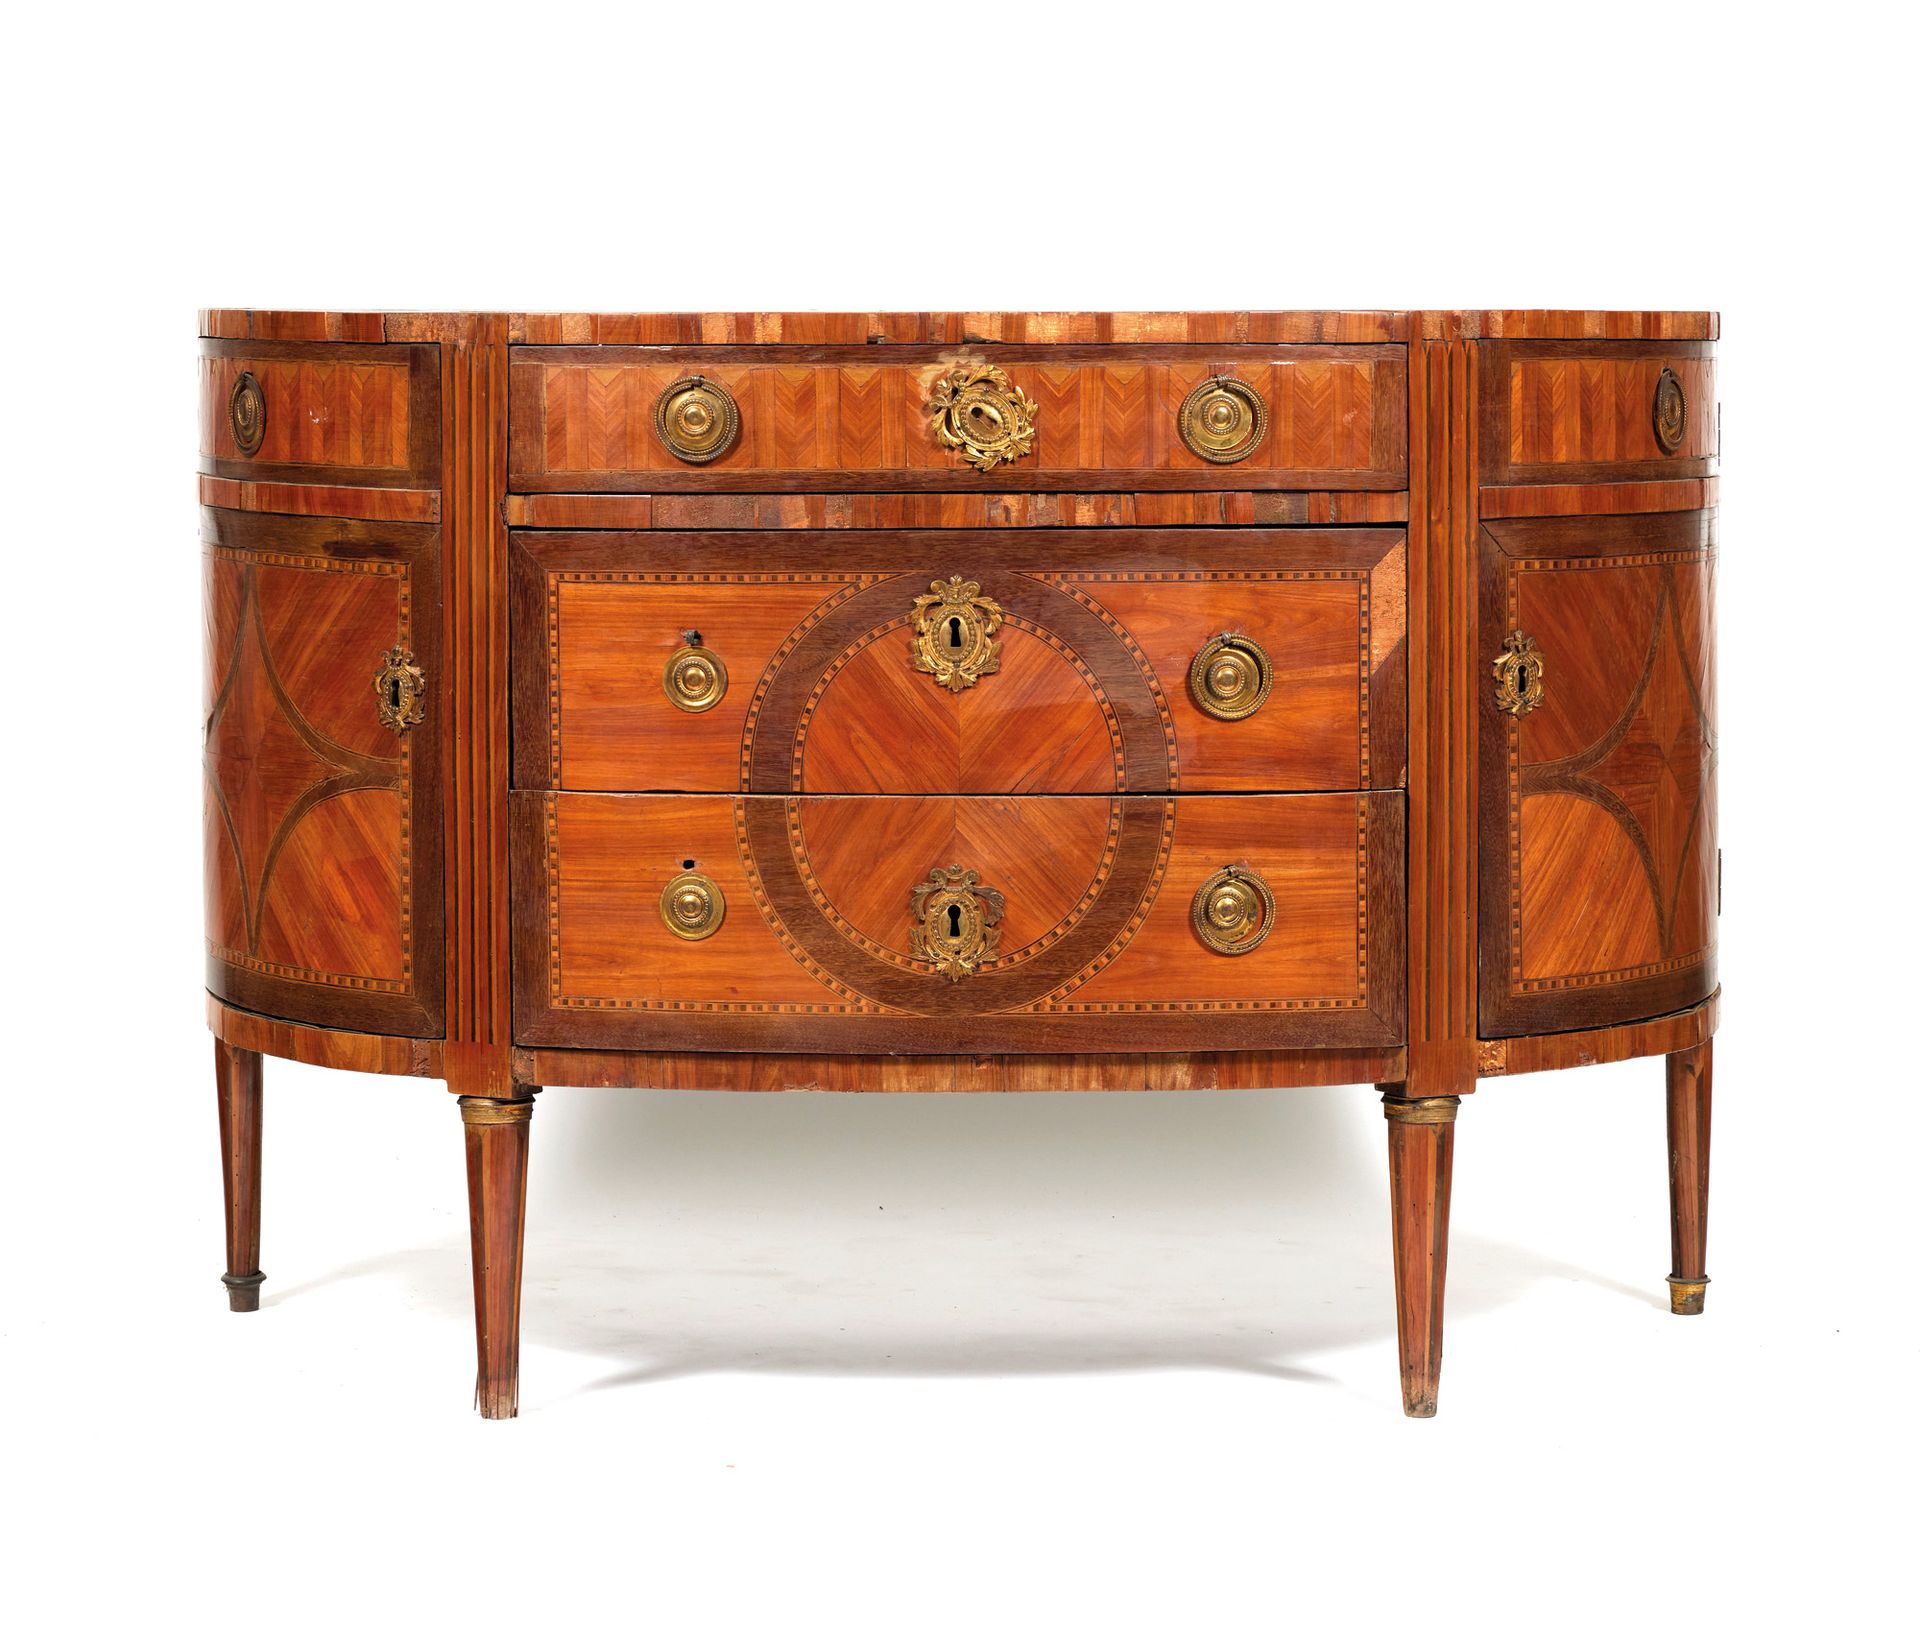 COMMODE DEMI-LUNE Half-moon chest of drawers

opening with three drawers in fron&hellip;